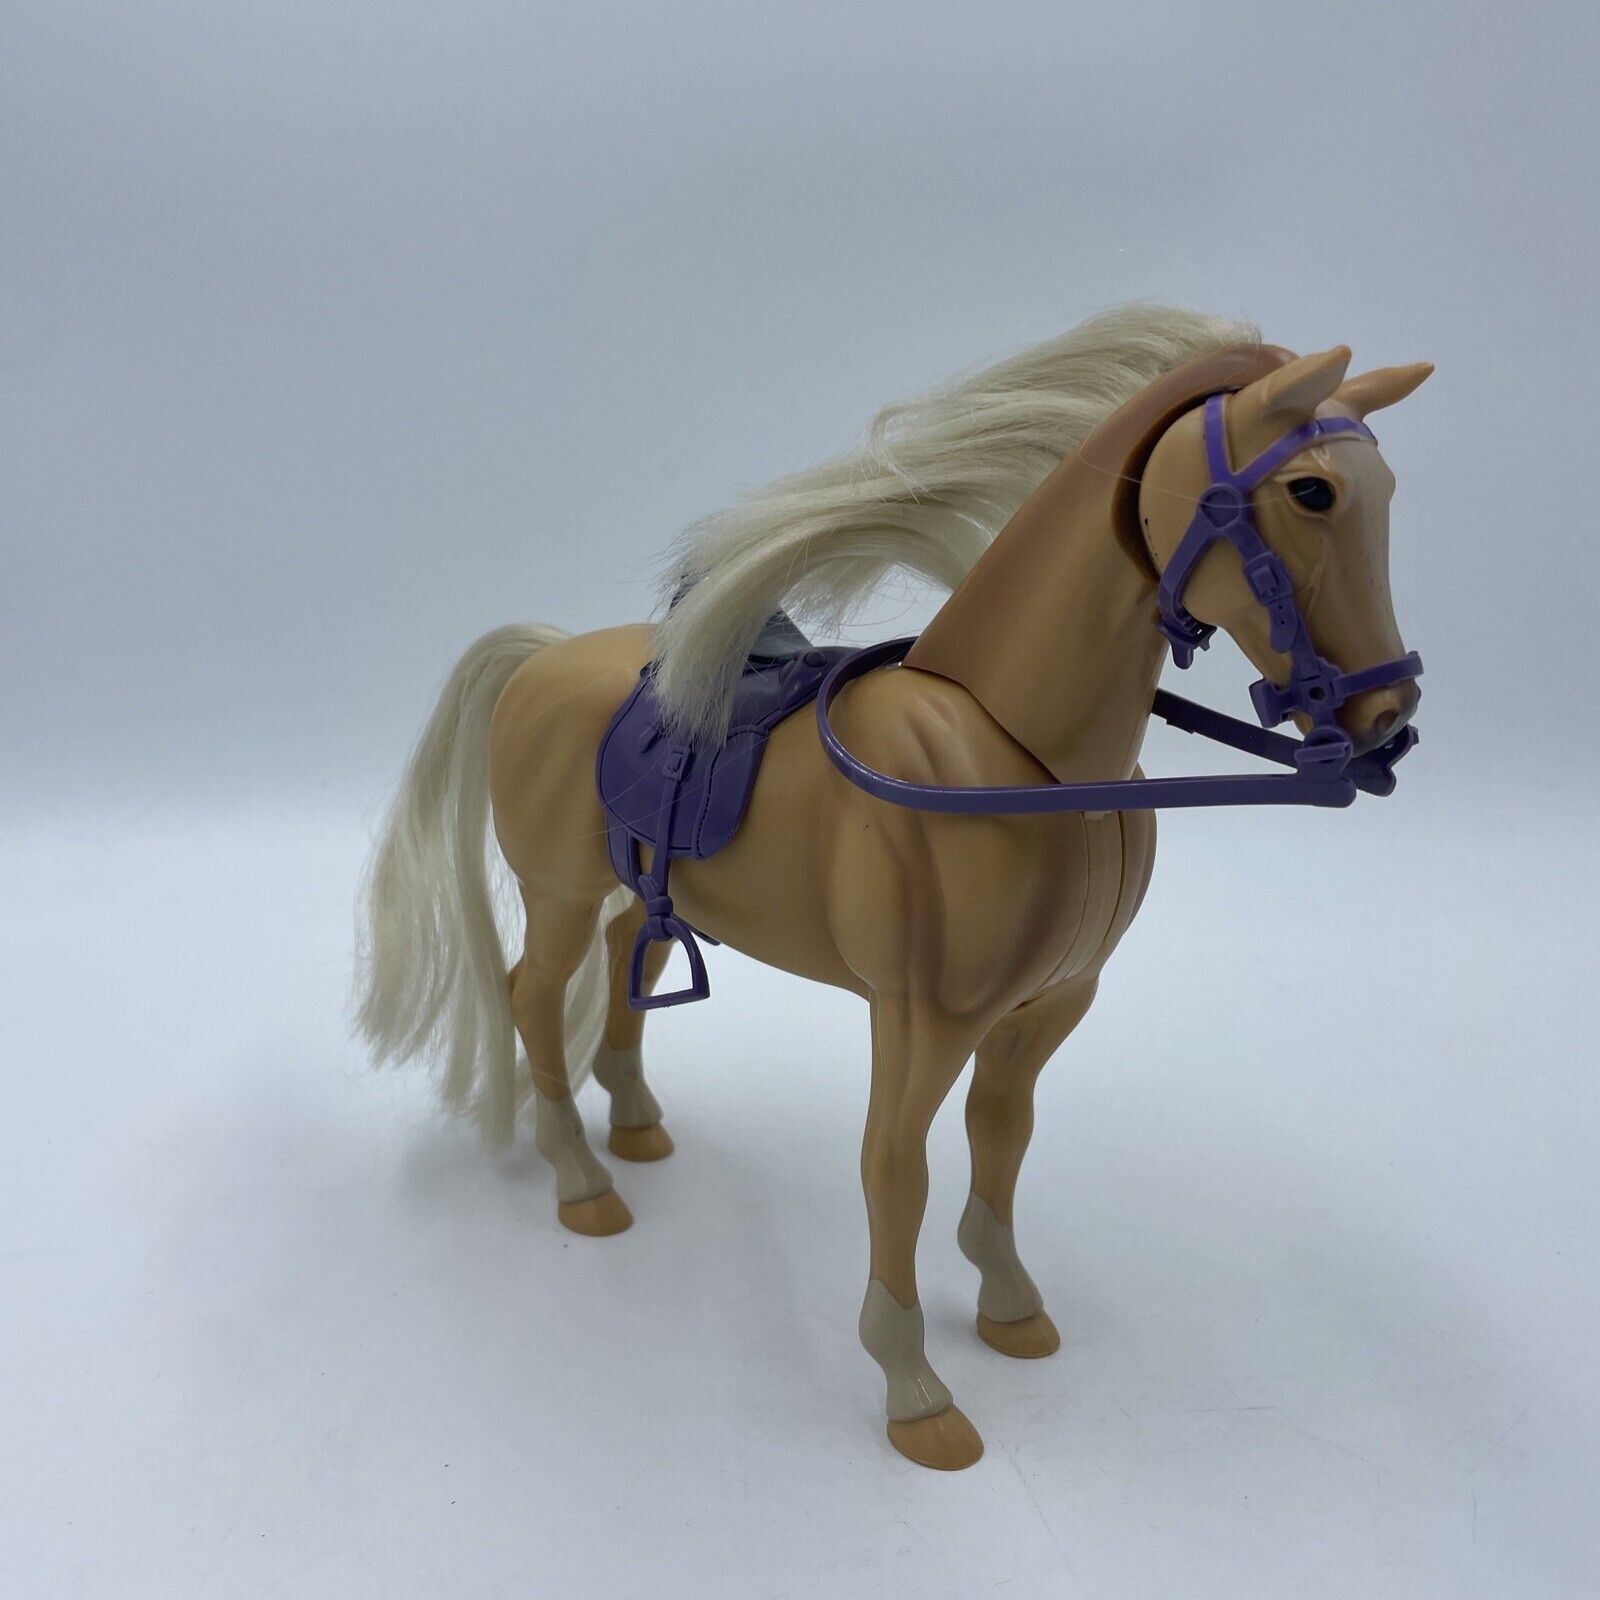 Bluebox Horse Figure Makes Galloping Neighing Noises Testing Working - Vintage